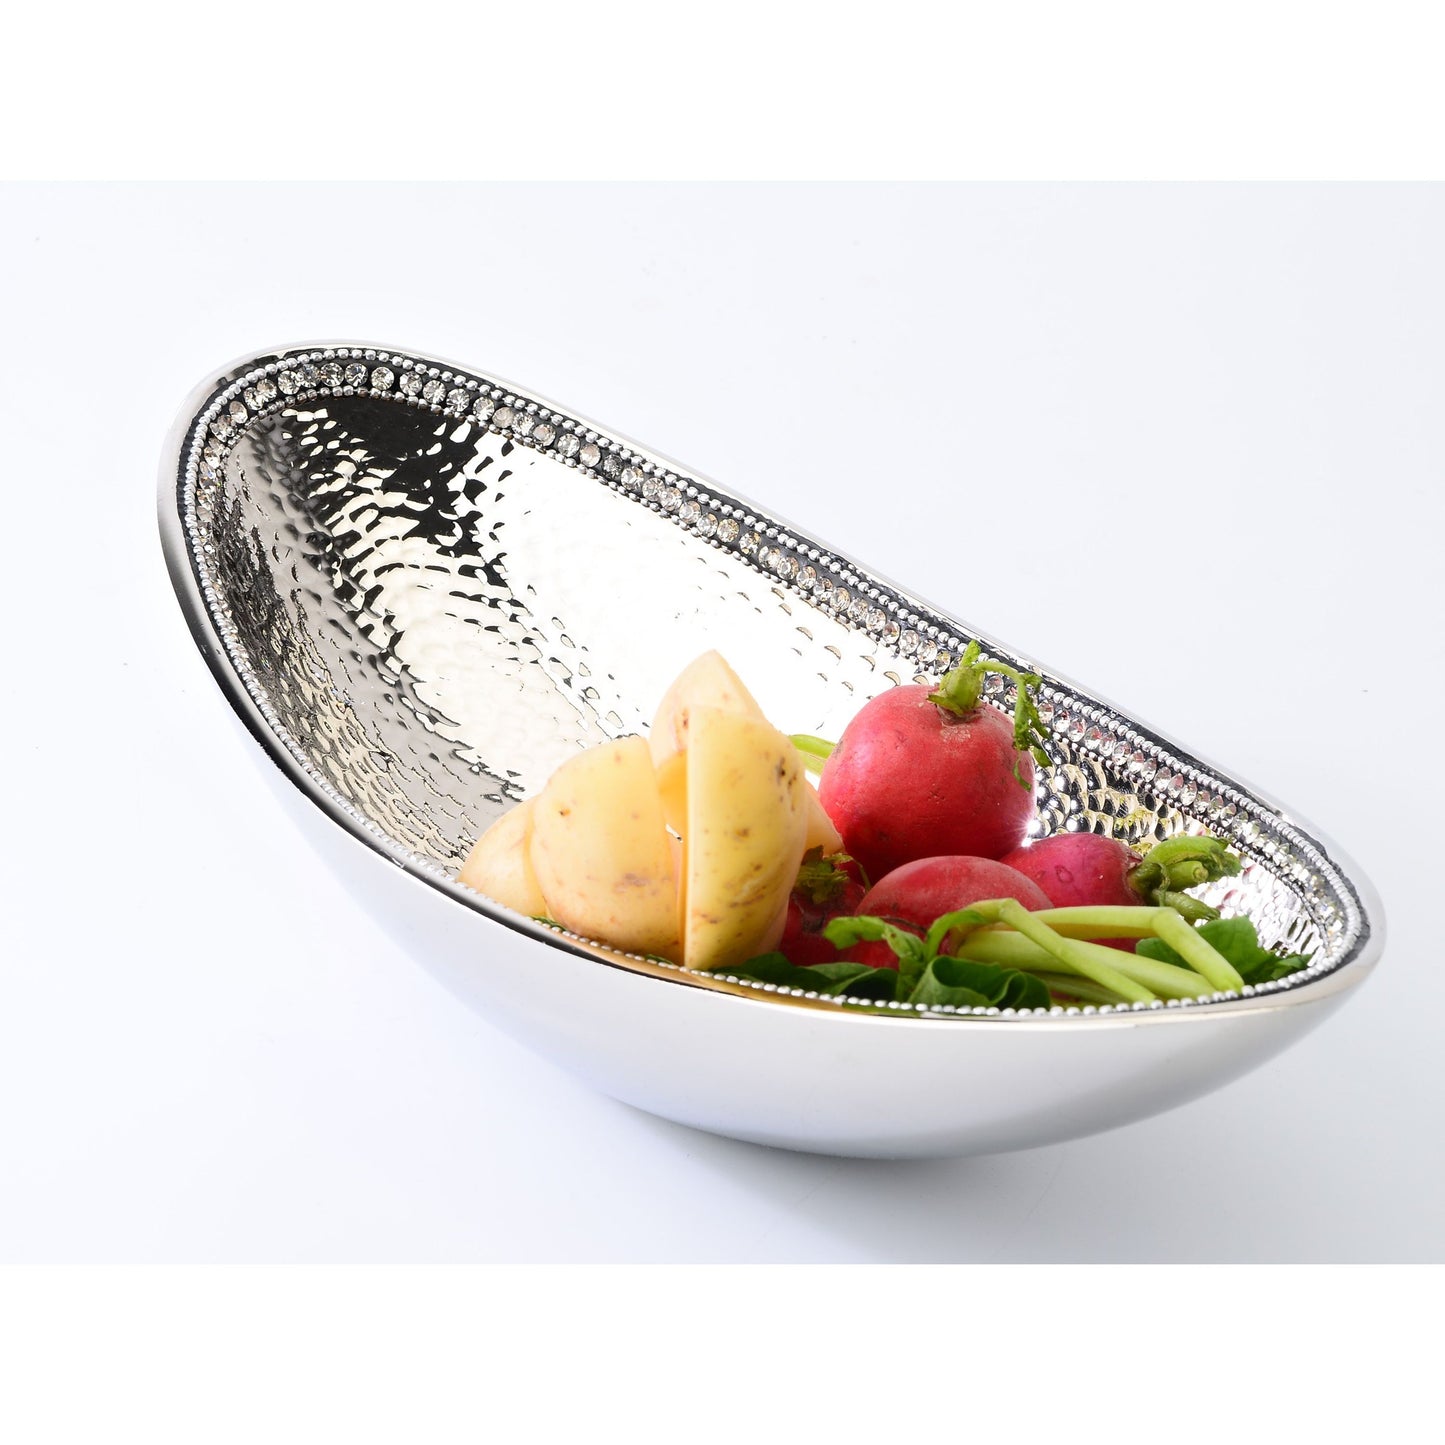 Classic Touch Decor Stainless Steel Boat Bowl with Stones, Silver, 11.75"